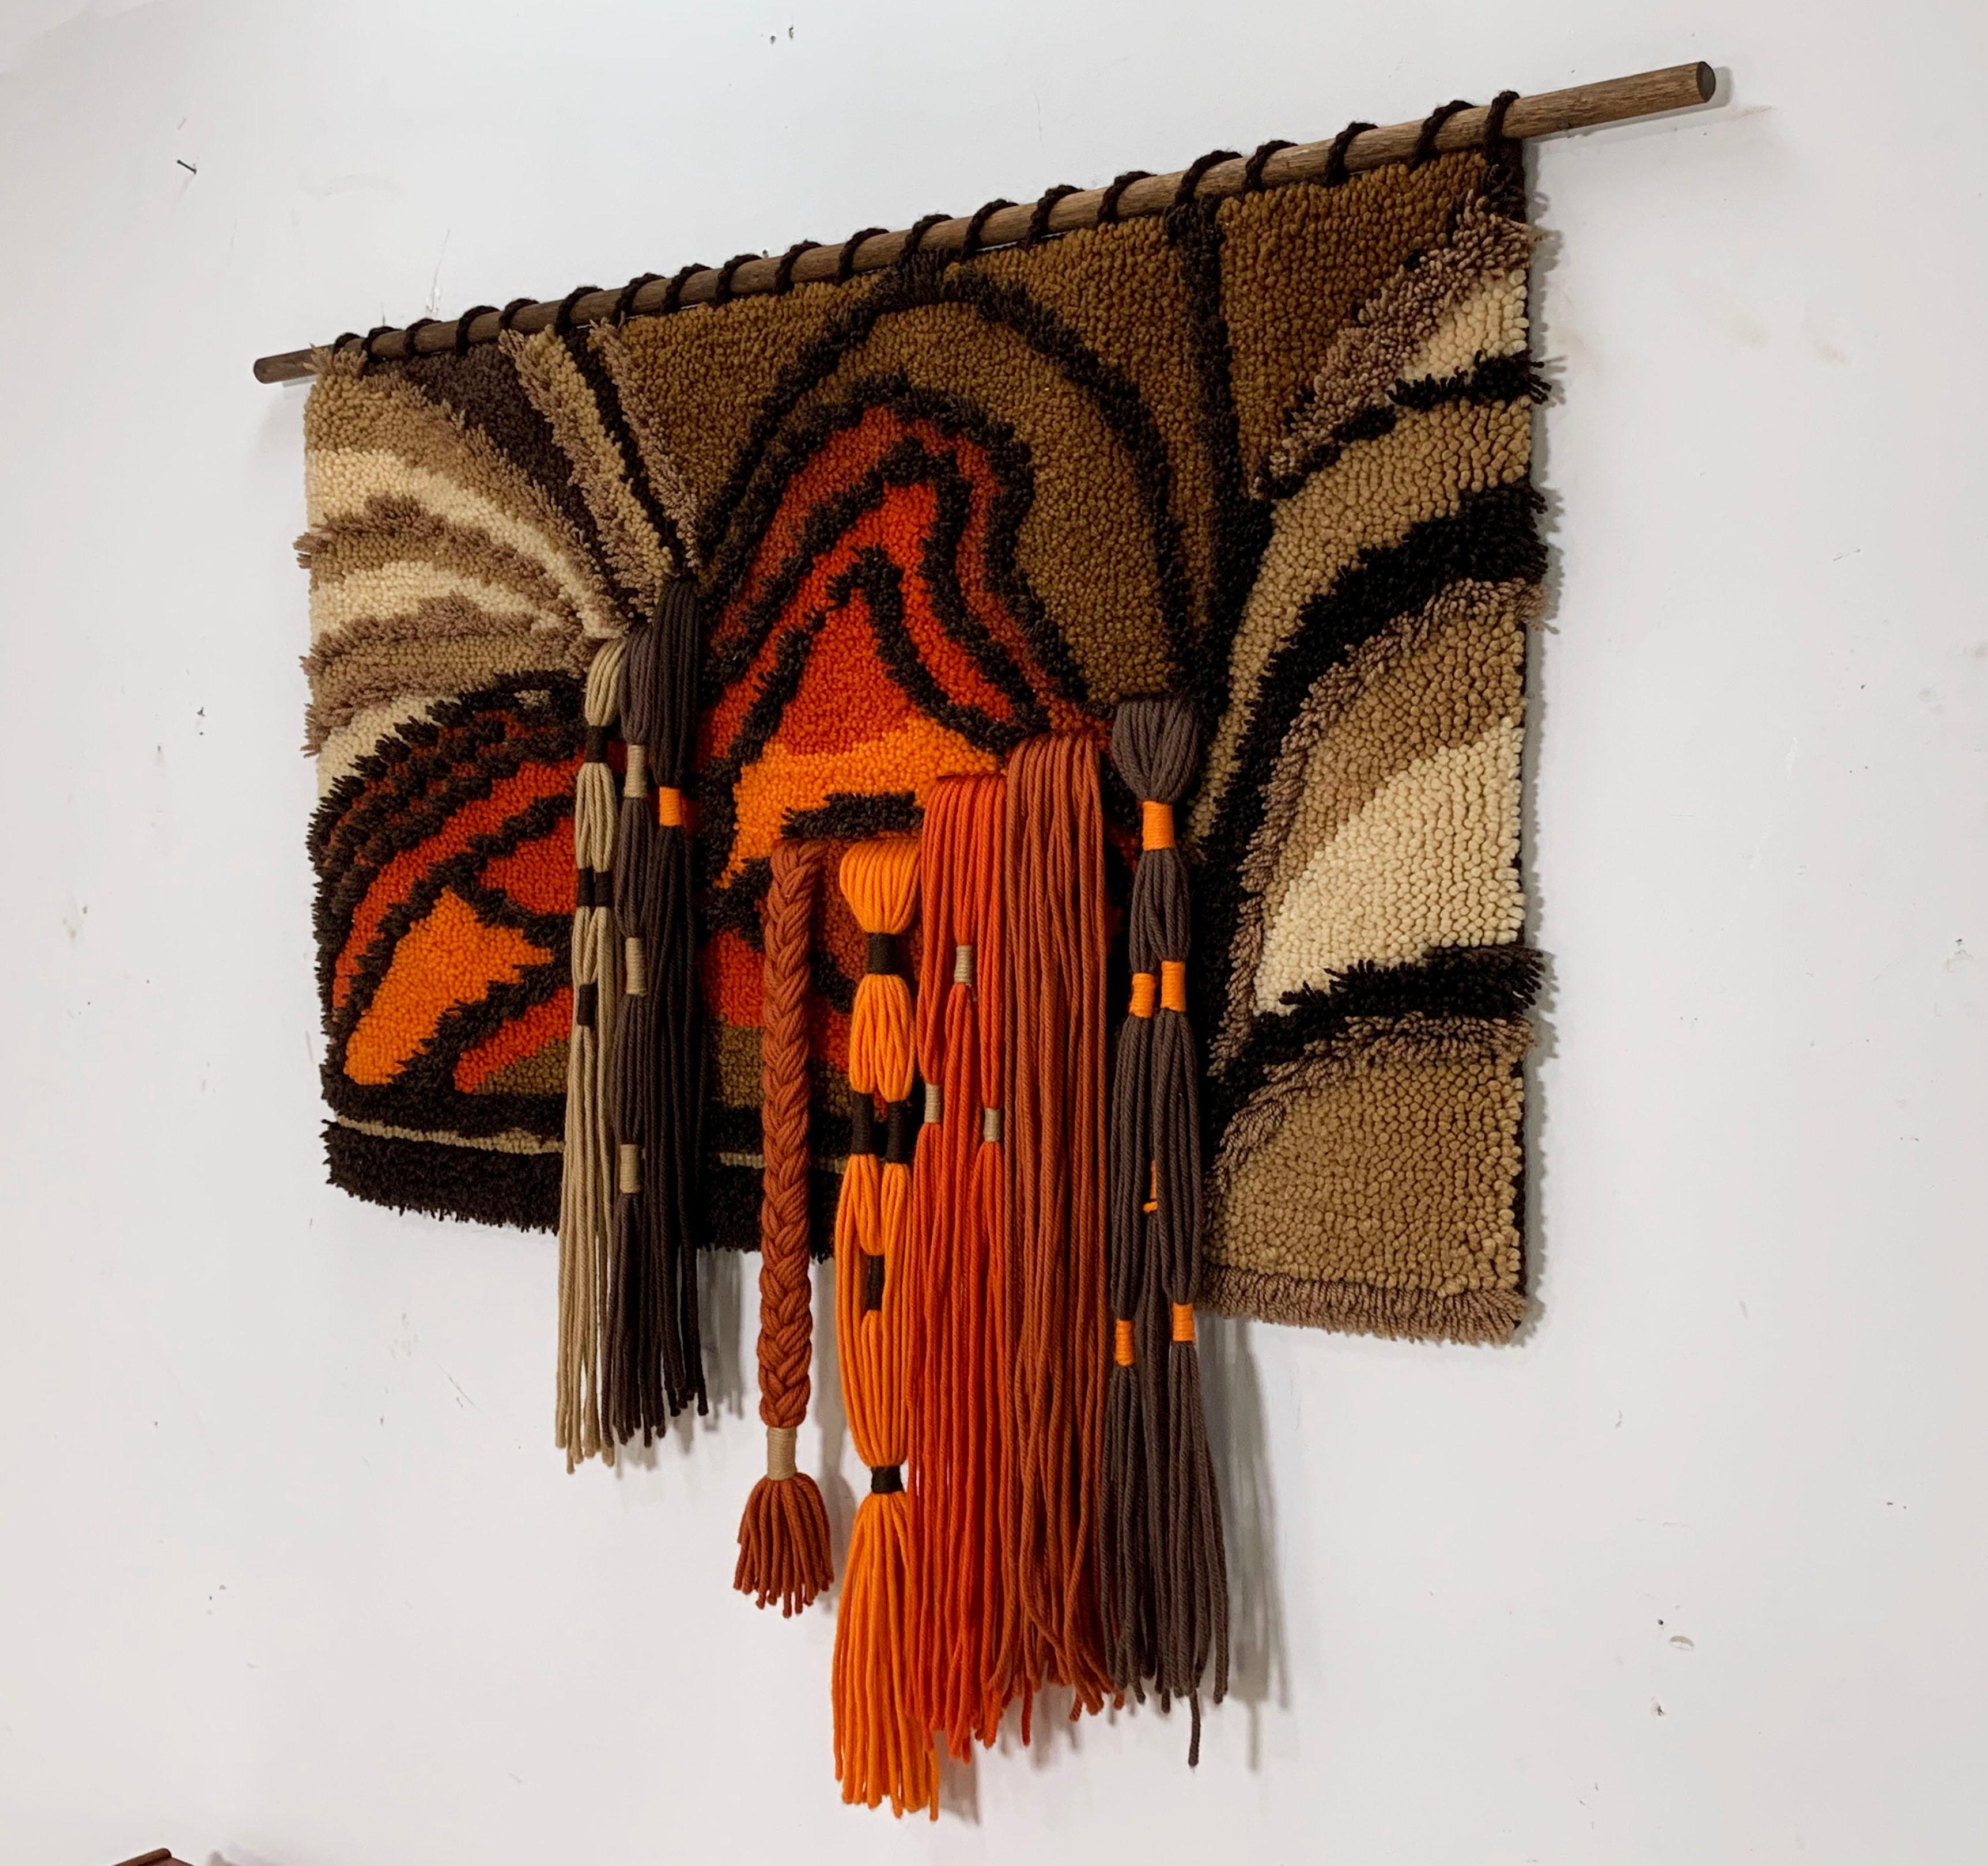 An artist crafted midcentury hand worked yarn weave textile wall hanging, circa 1970s. A wonderful example of 1970s era craft, with colorful dimensionality.
Textile measures: 44